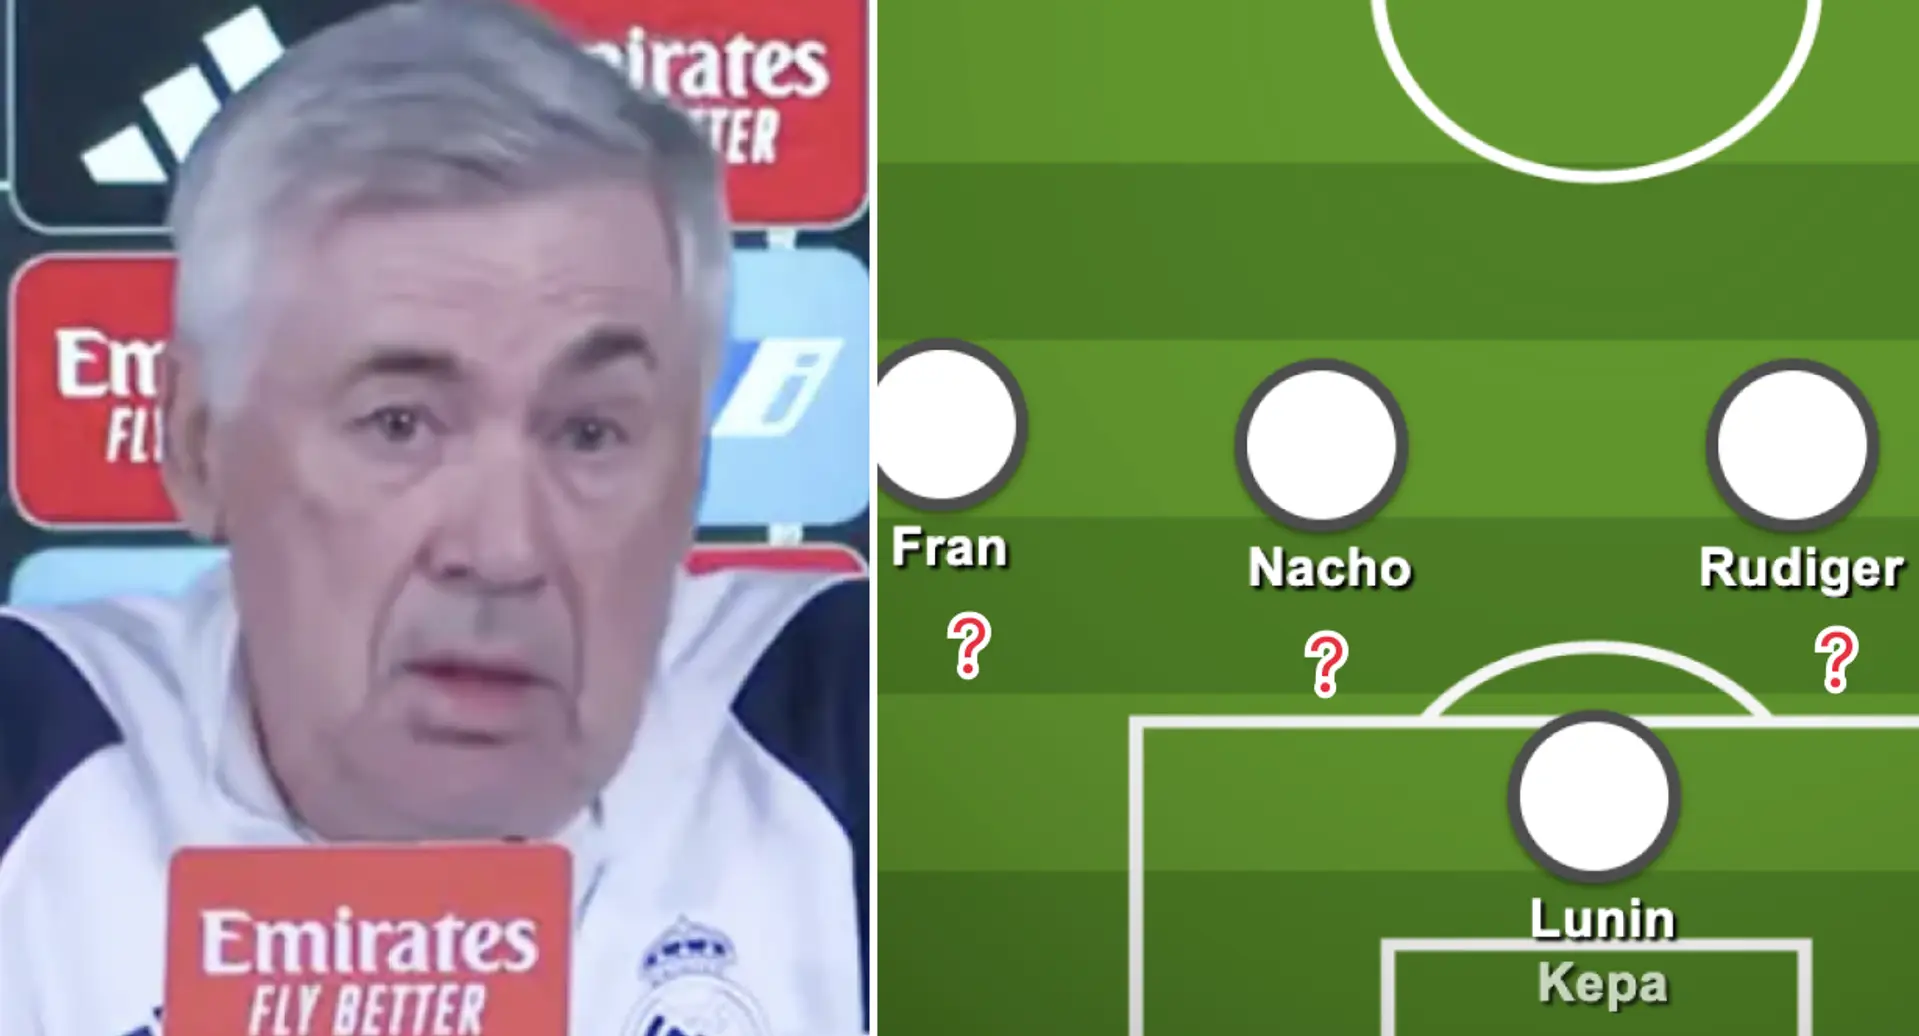 Real Madrid's squad depth in defence for January shown in pic